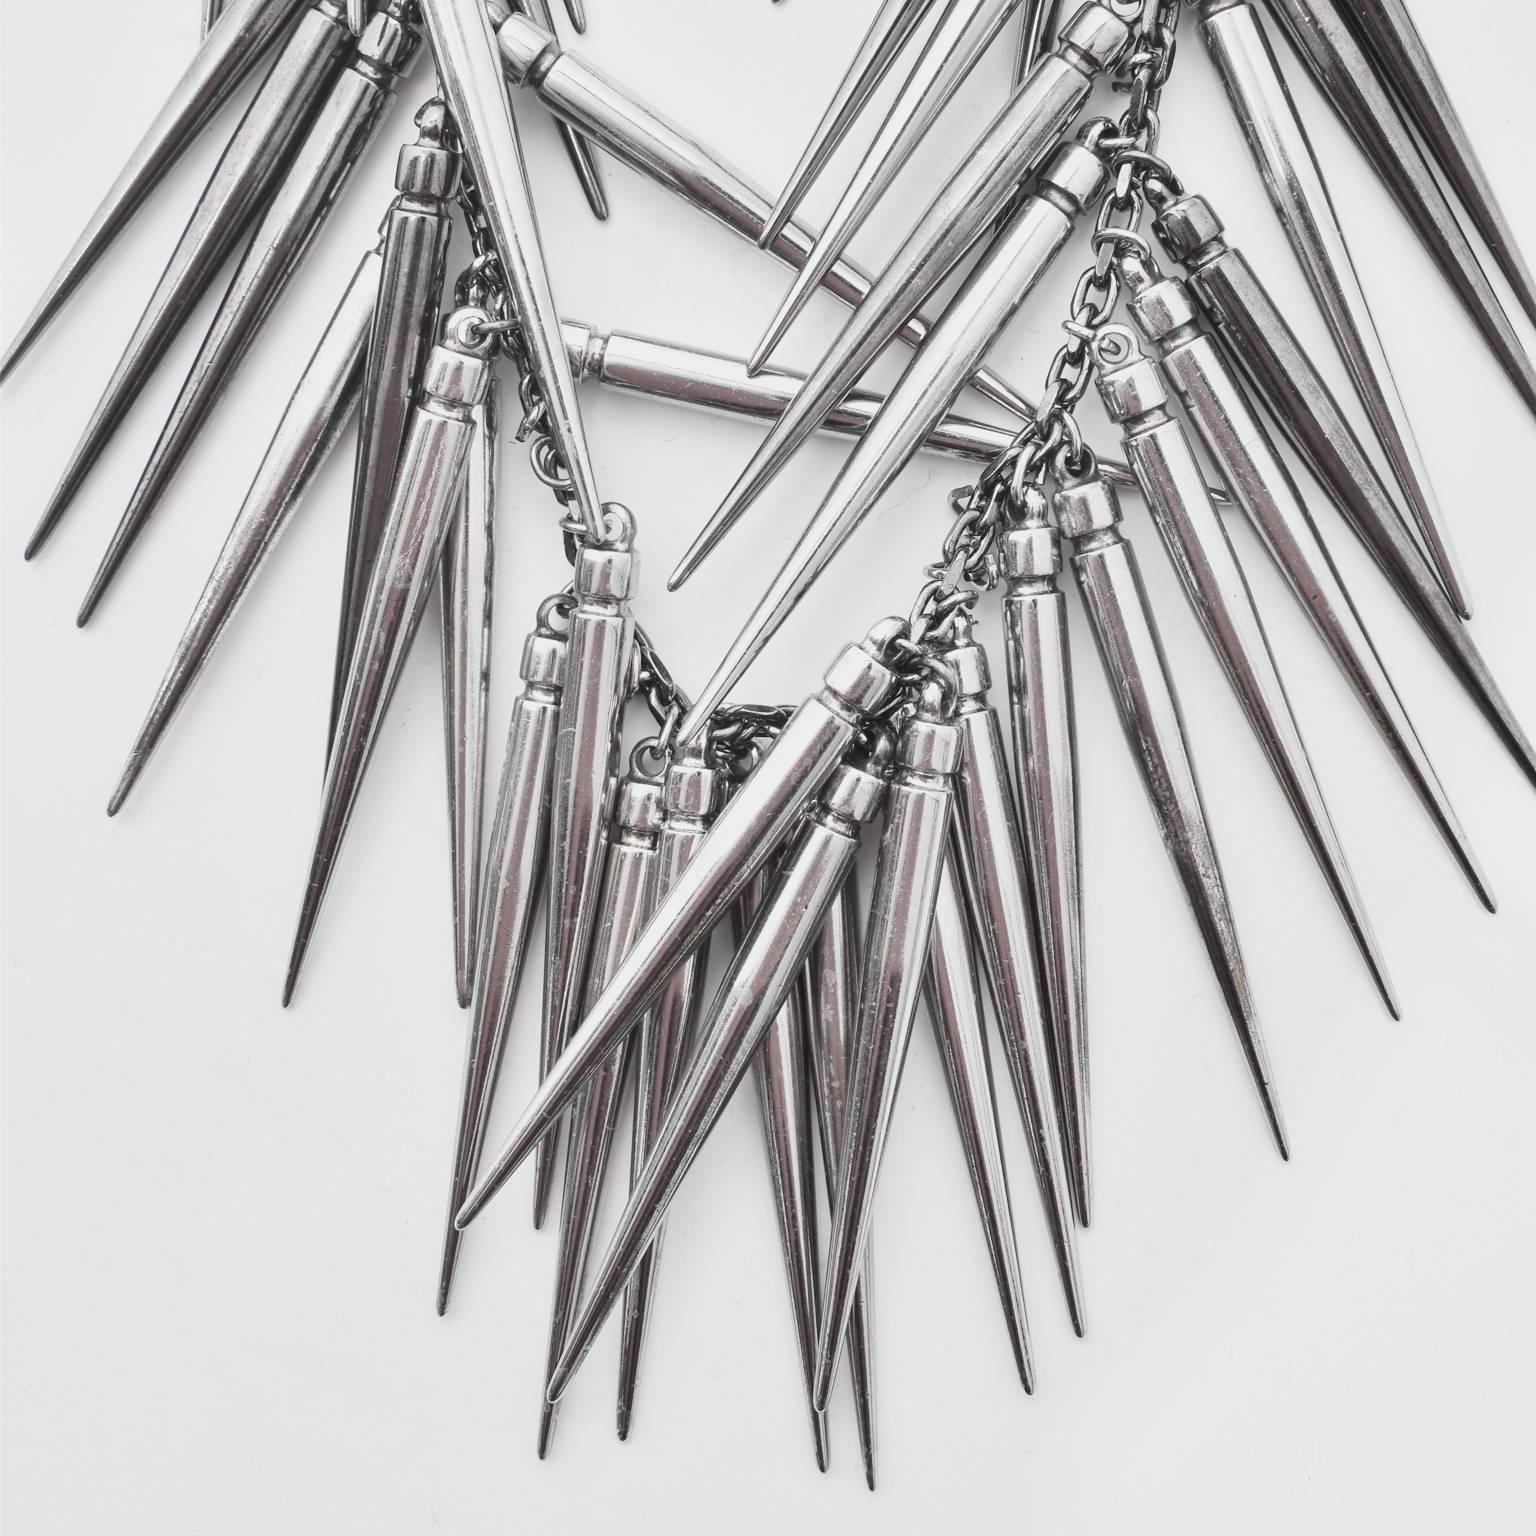 A stunning large statement necklace from Burberry’s 2010 Prorsum runway collection. The necklace is made from gunmetal spikes on a silver chunky chain that circle around the entire necklace. It is heavy and certainly makes a bold statement.
The